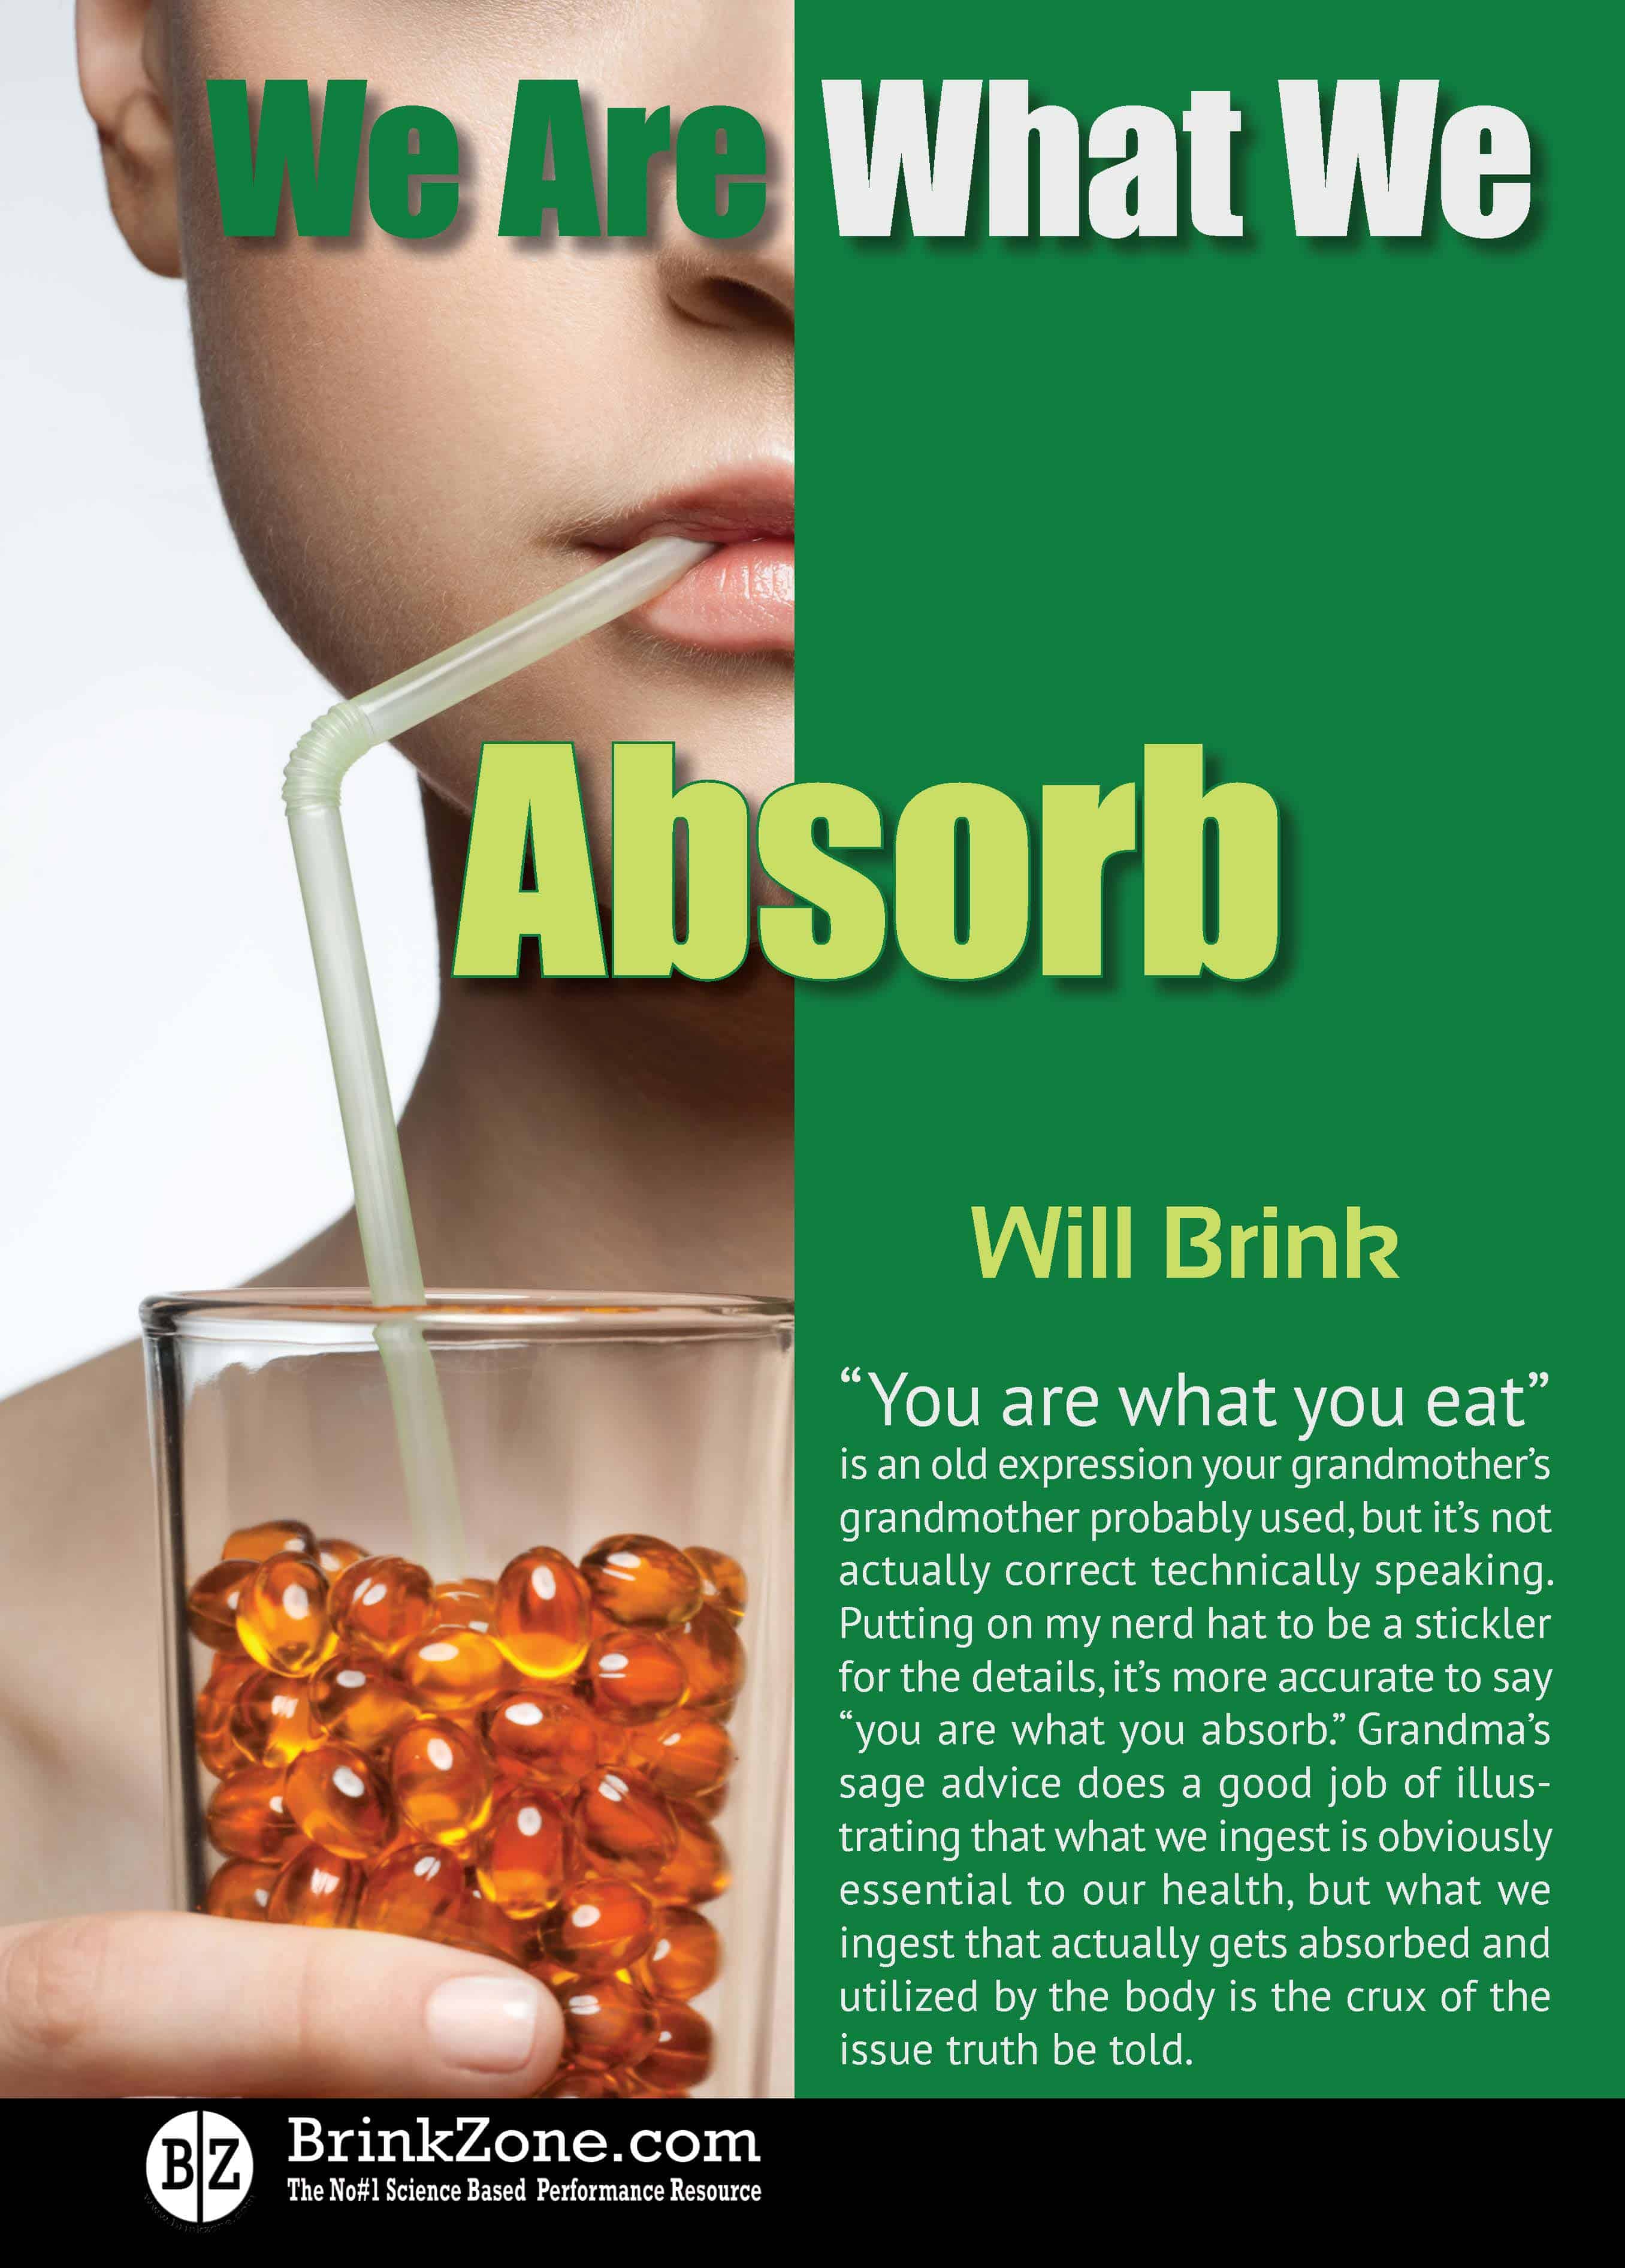 You are what you absorb